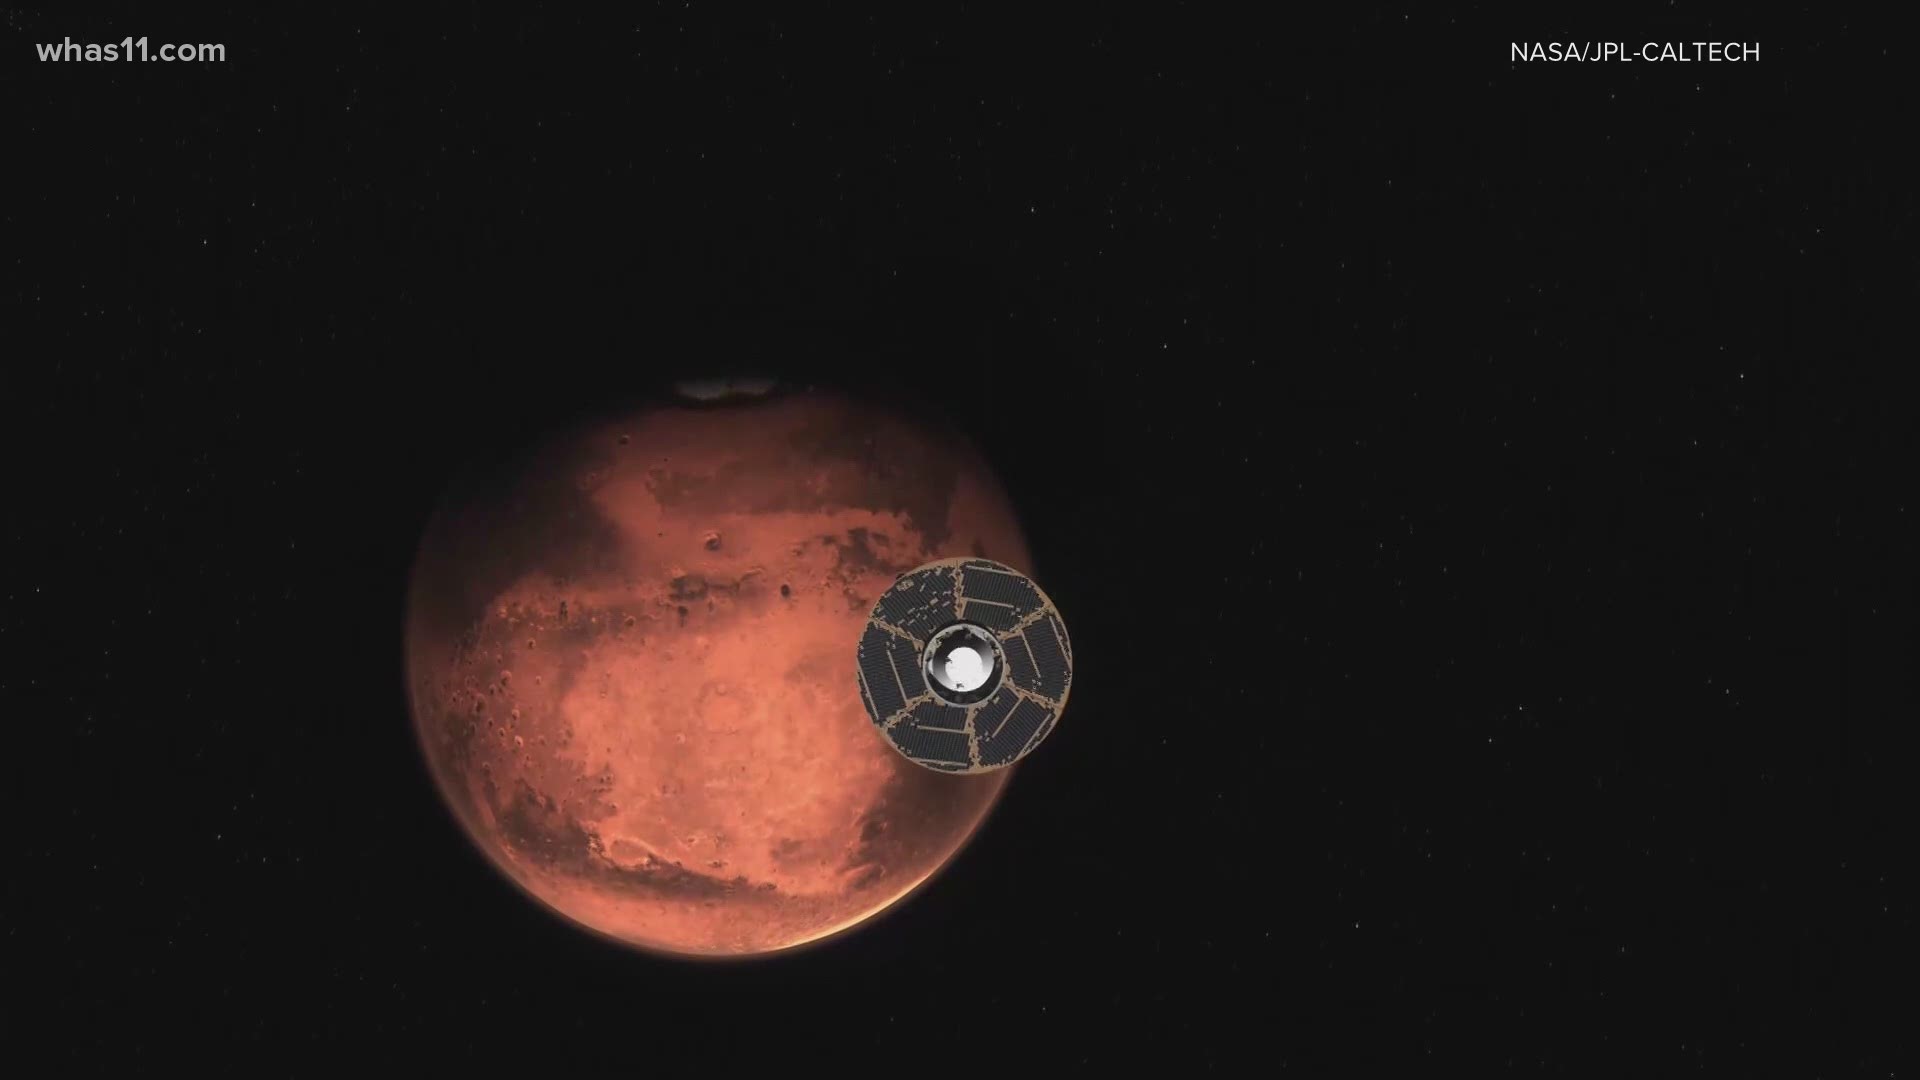 The rover will study fossils and also use specialized technology to study Mars' atmosphere.